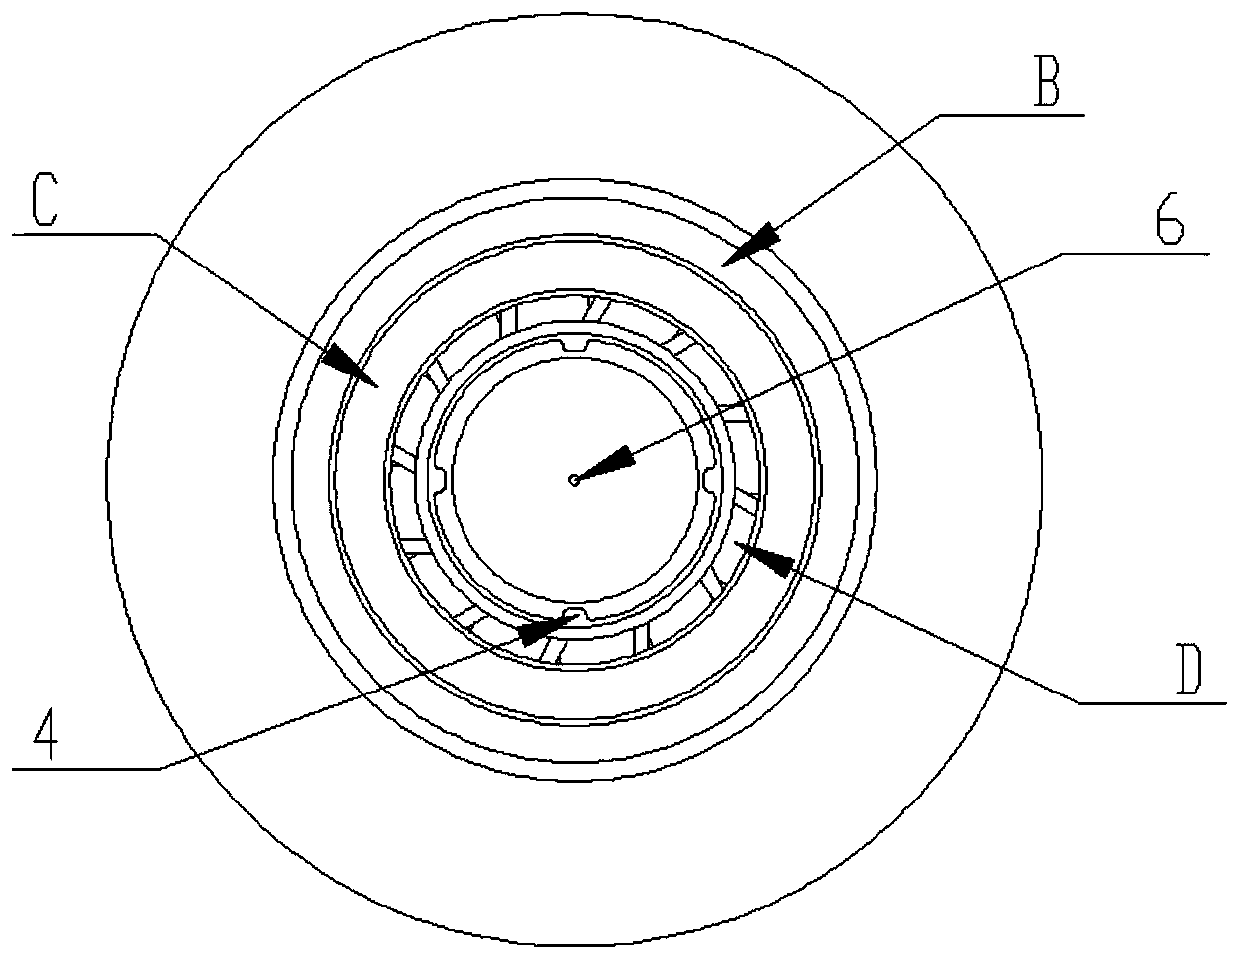 Rotational flow atomization device achieving fractional combustion